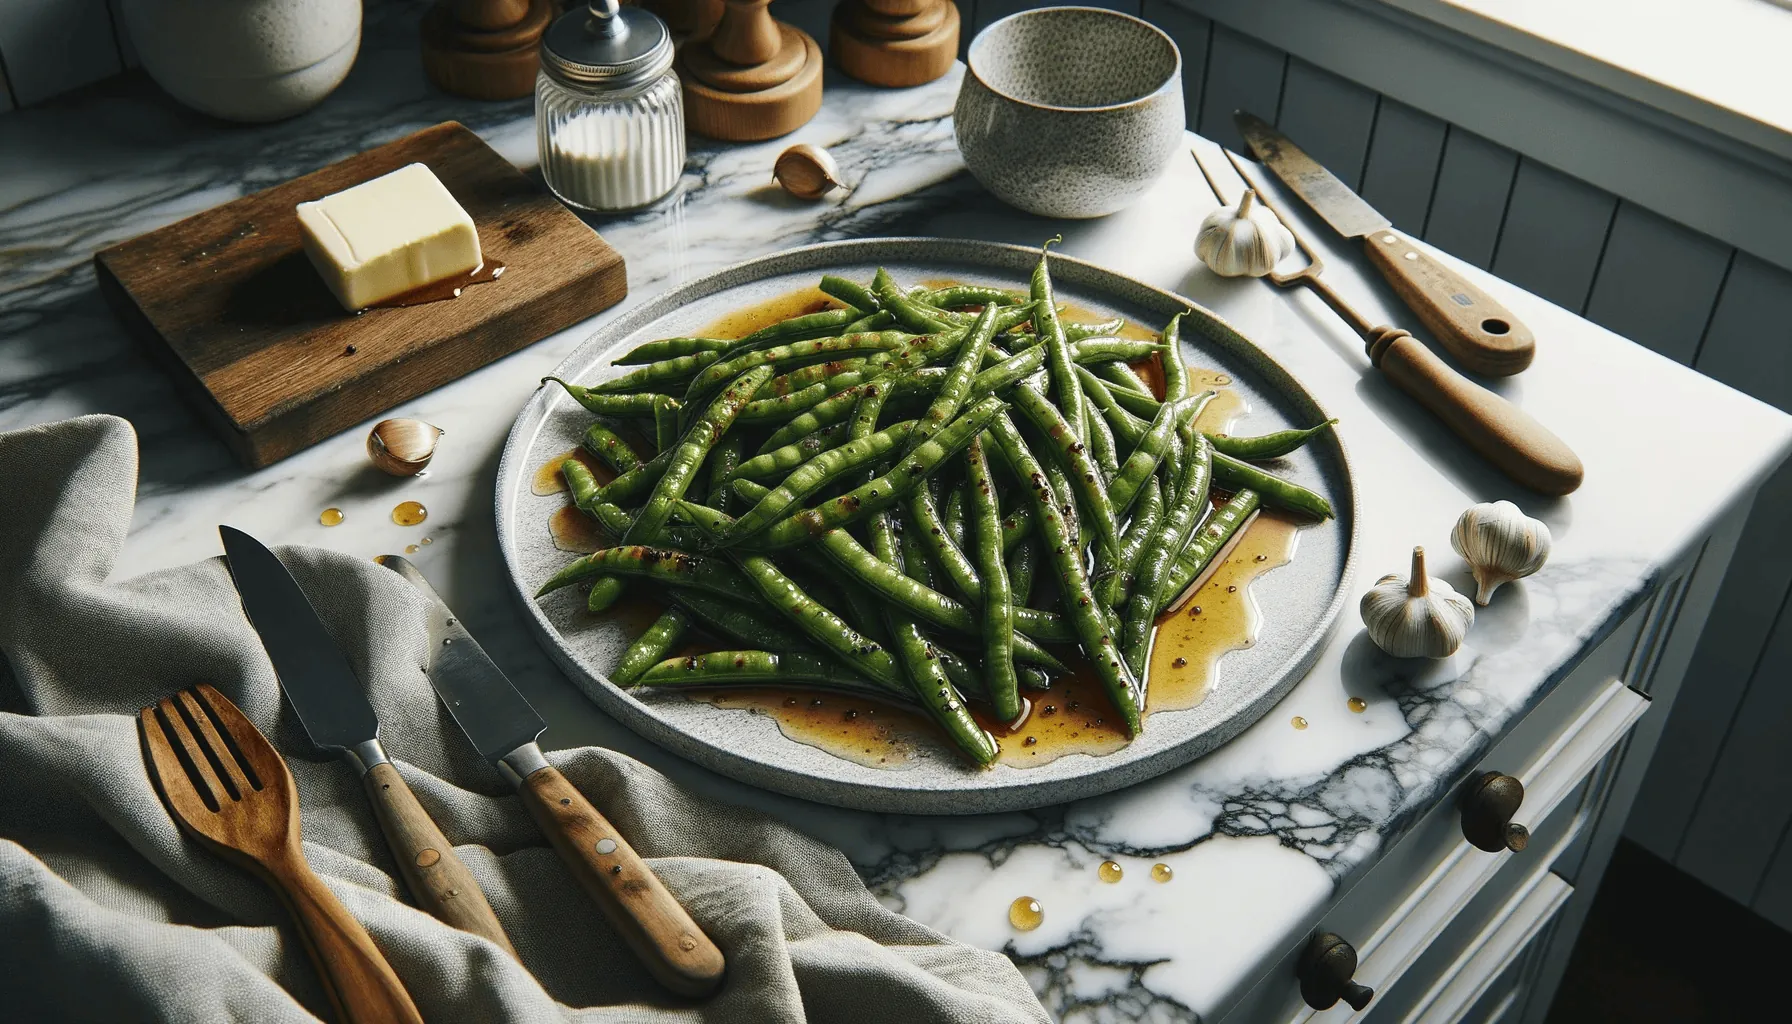 Maple-roasted green beans, ready to serve